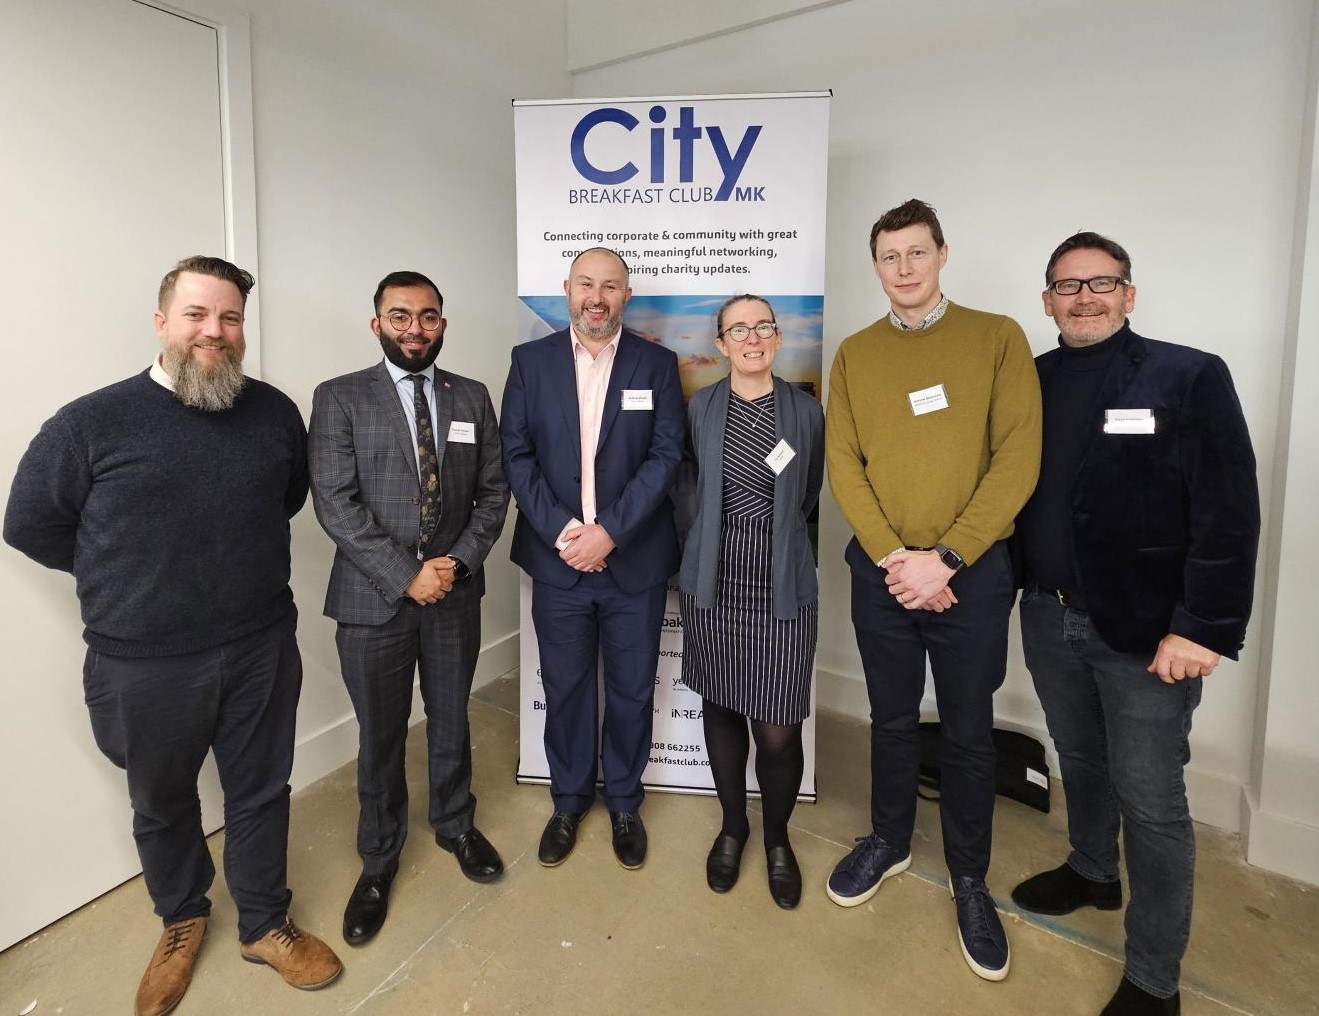 iNREACH Group and Metro Bank Bolster City’s Premier Networking Meeting as Newest Sponsors of City Breakfast Club, Milton Keynes | Northamptonshire Chamber of Commerce